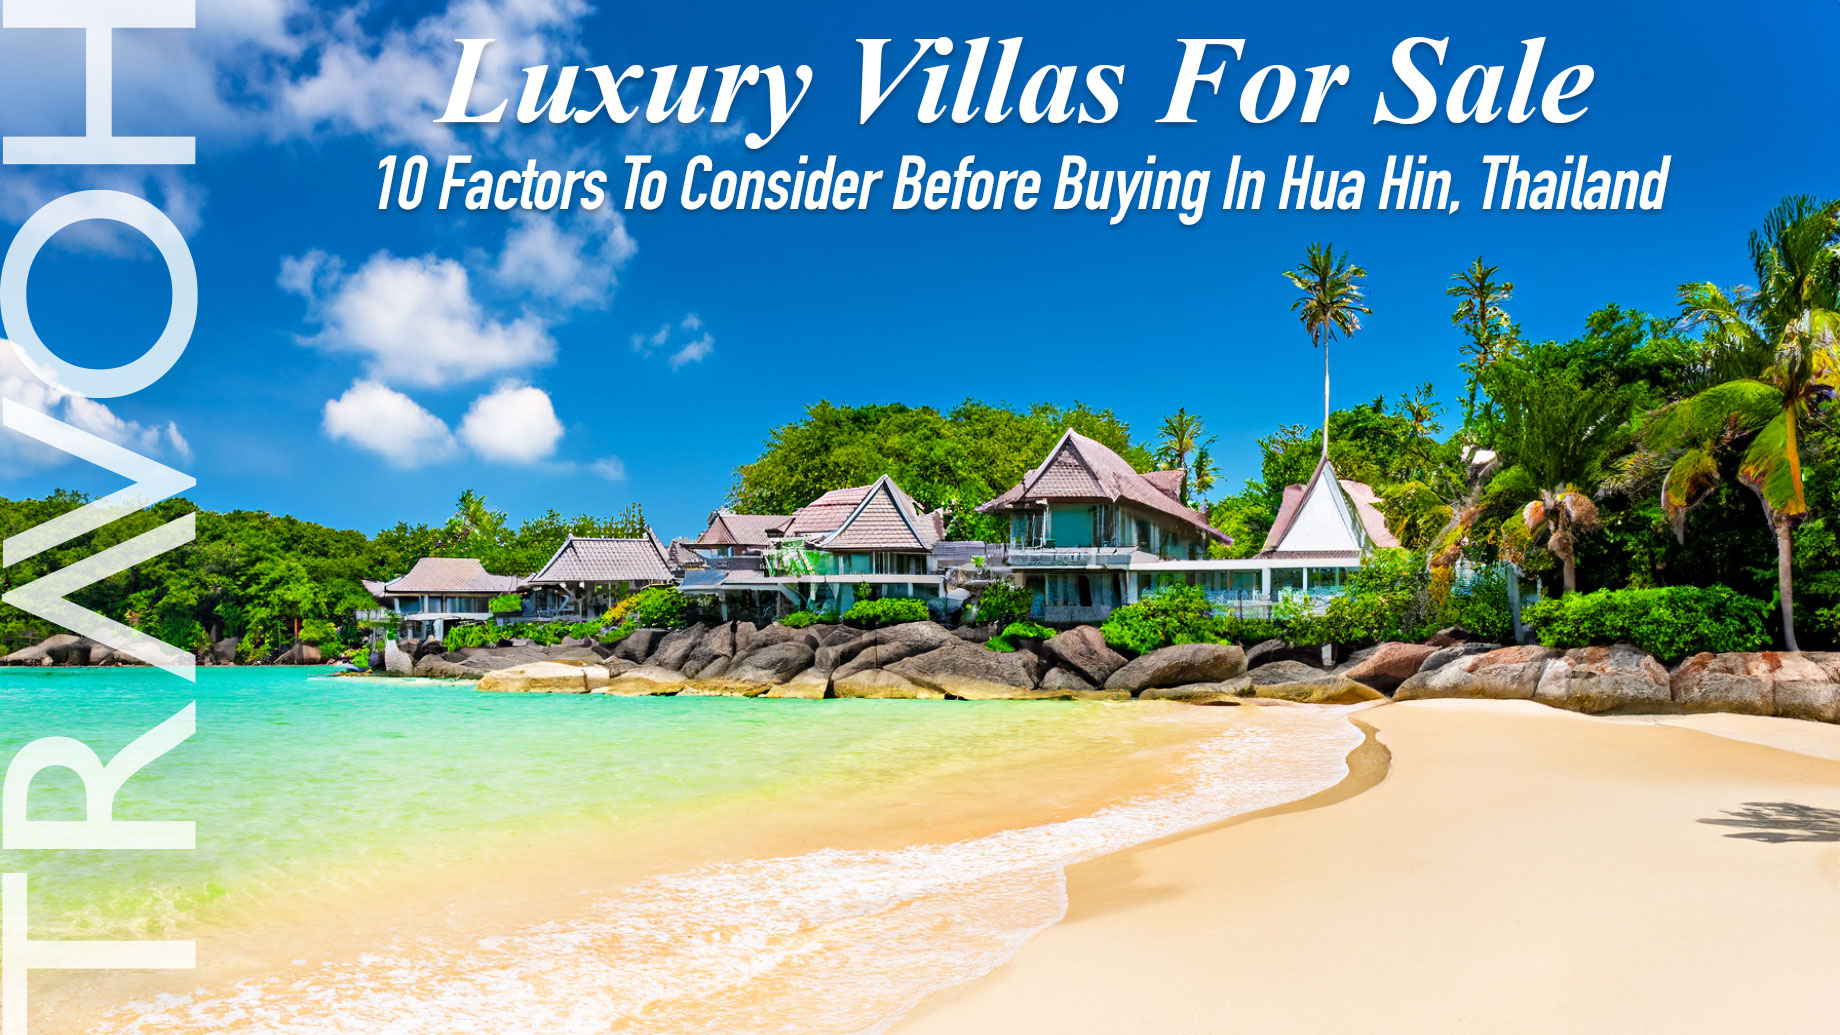 Luxury Villas For Sale: 10 Factors To Consider Before Buying In Hua Hin, Thailand